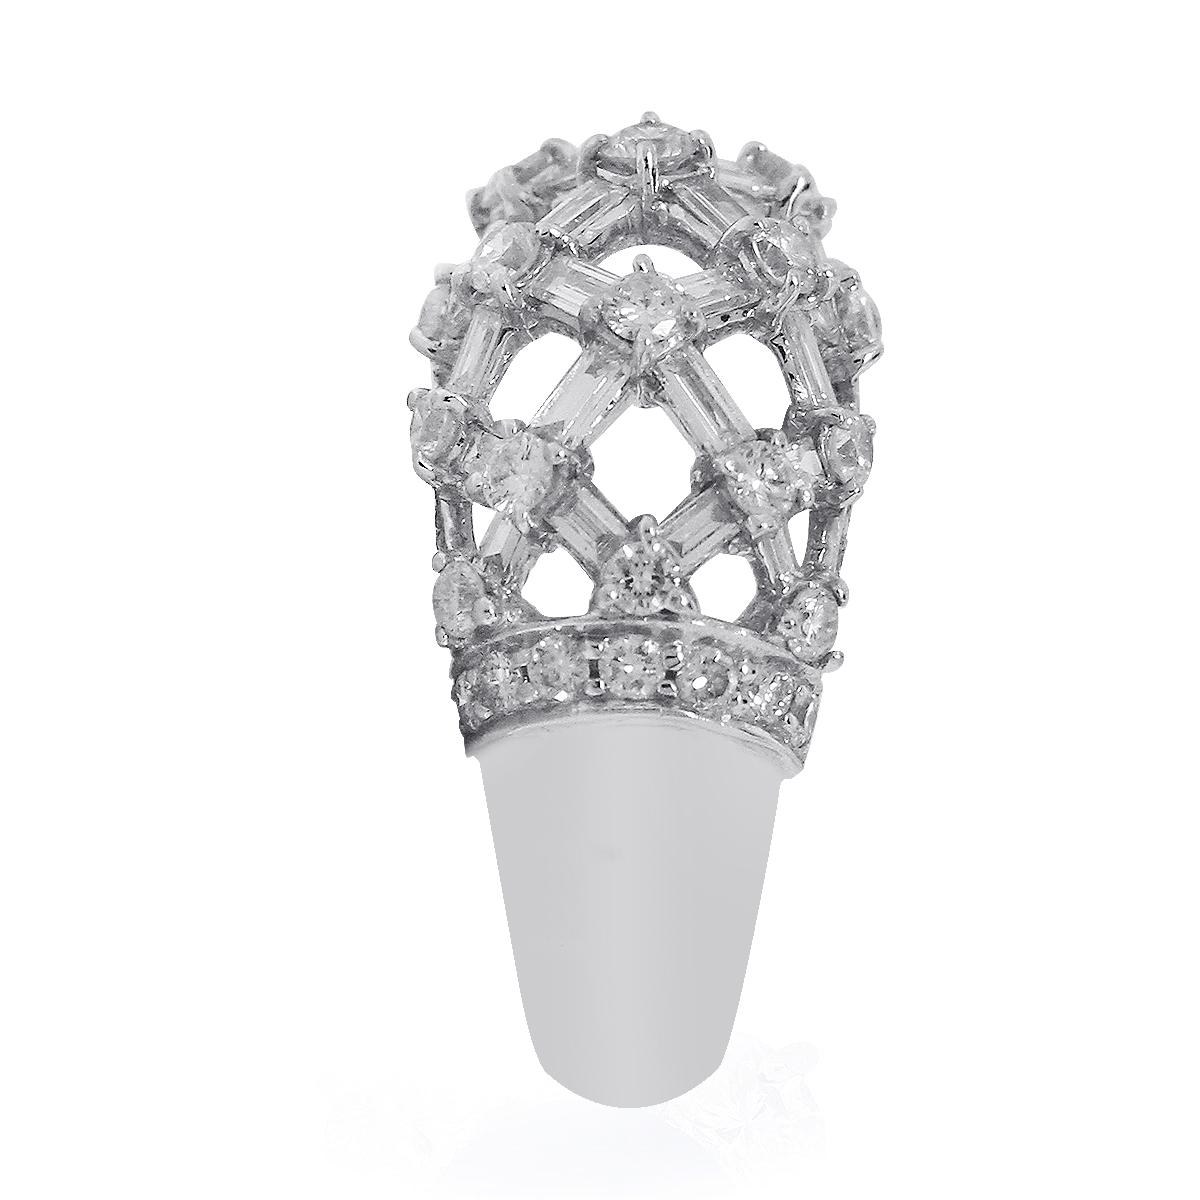 Material: 18k White Gold
Diamond Details: Approximately 3.04ctw baguette cut diamonds. Diamonds are G/H in color and VS in clarity.
Ring Size: 7.5
Total Weight: 11g (7.1dwt)
Measurements: 0.95